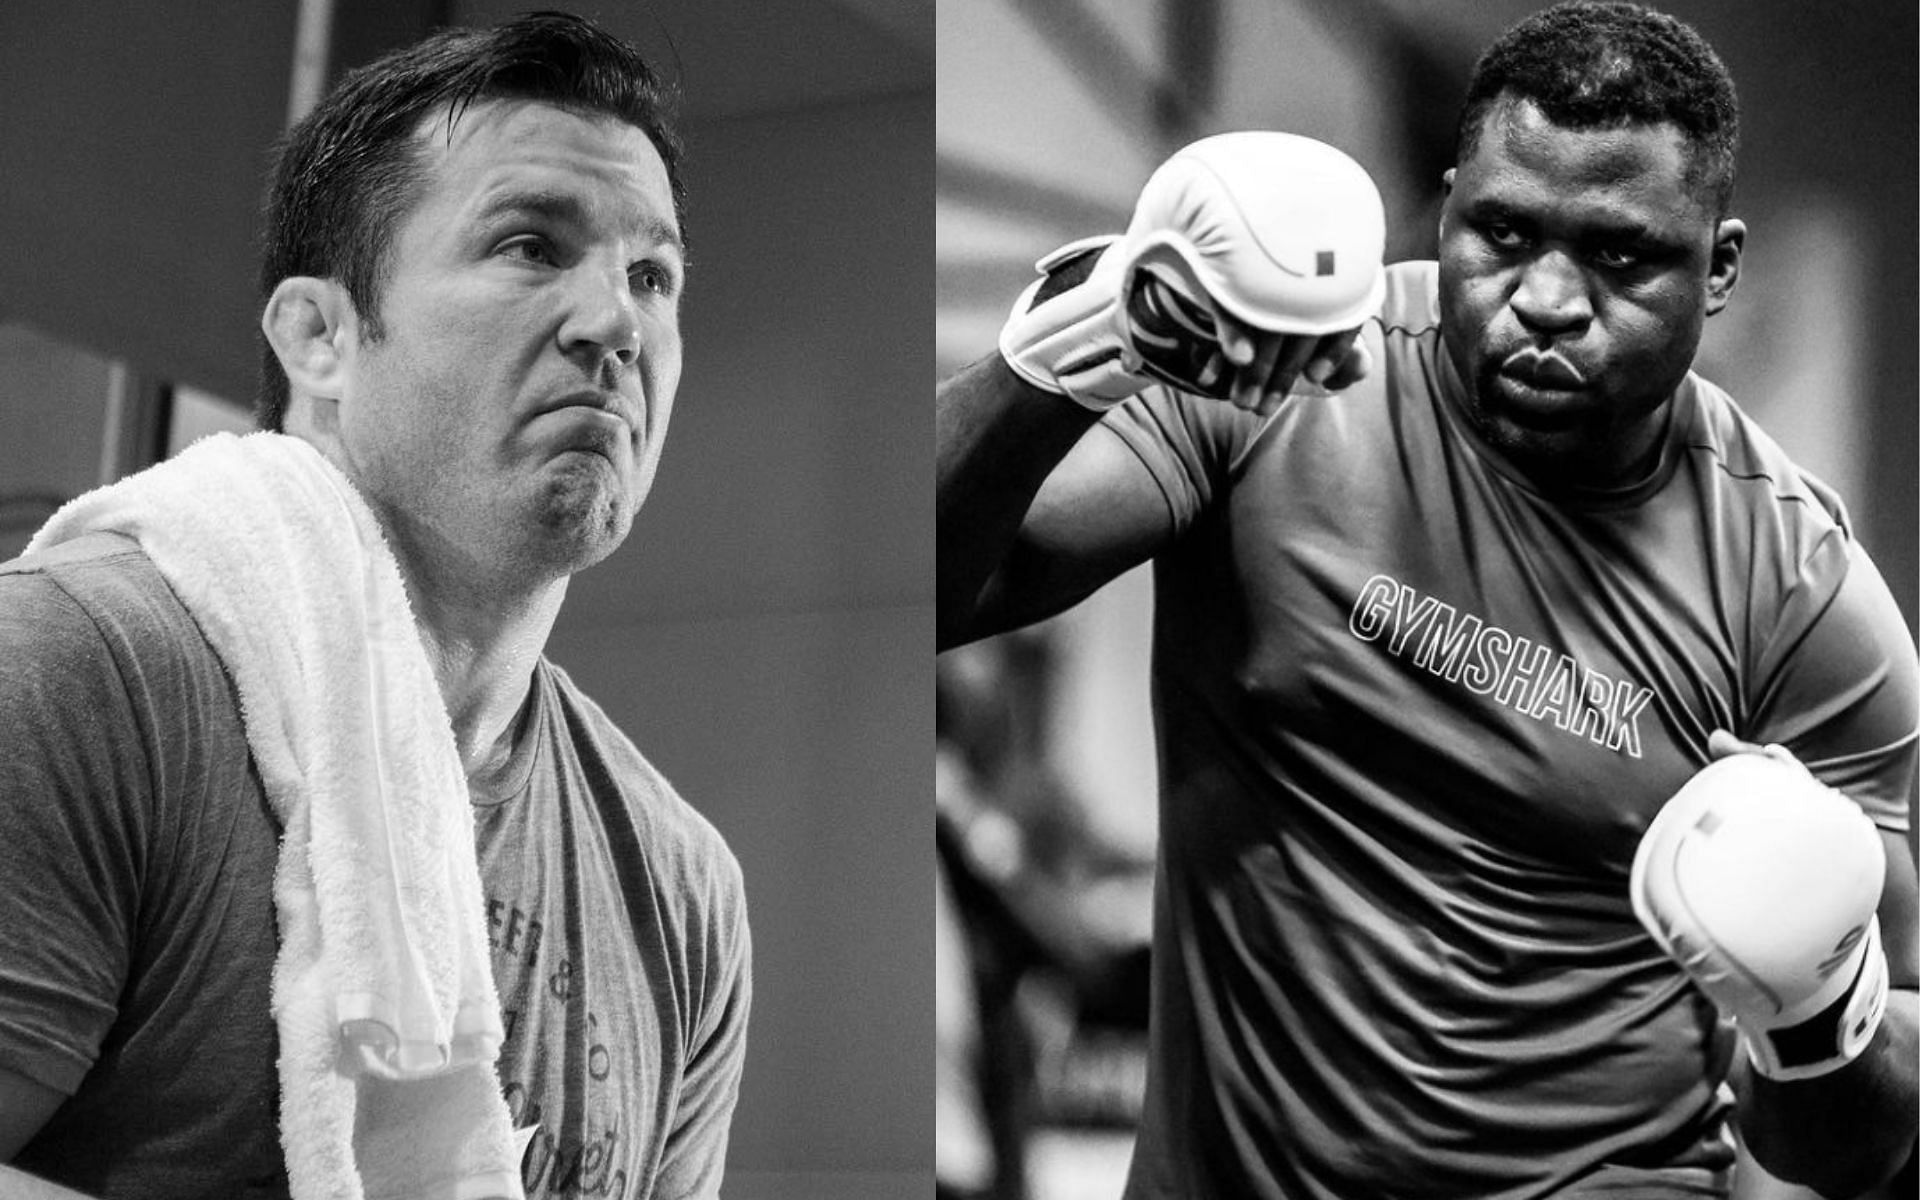 Chael Sonnen hints at twist in Francis Ngannou exit with cryptic tweet [images via: @francisngannou and @sonnench on Instagram]